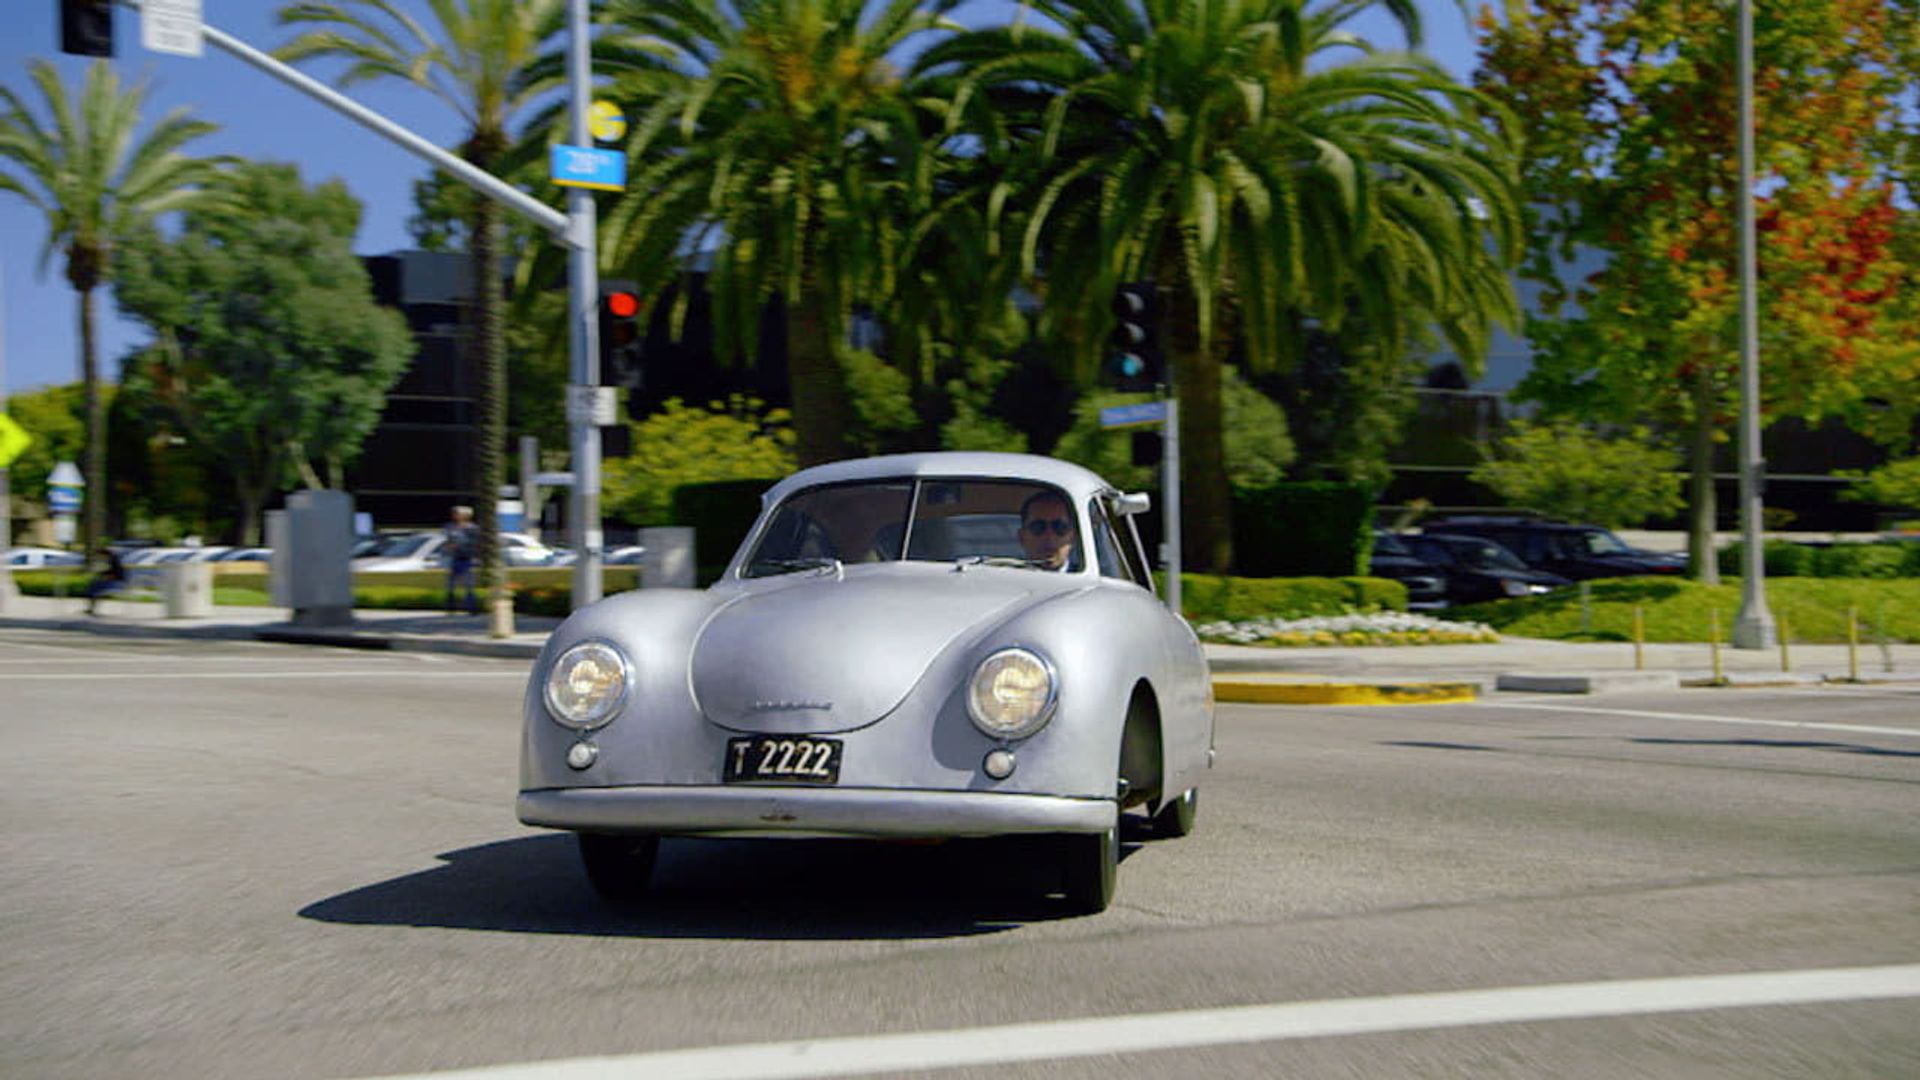 Comedians in Cars Getting Coffee: Single Shot background